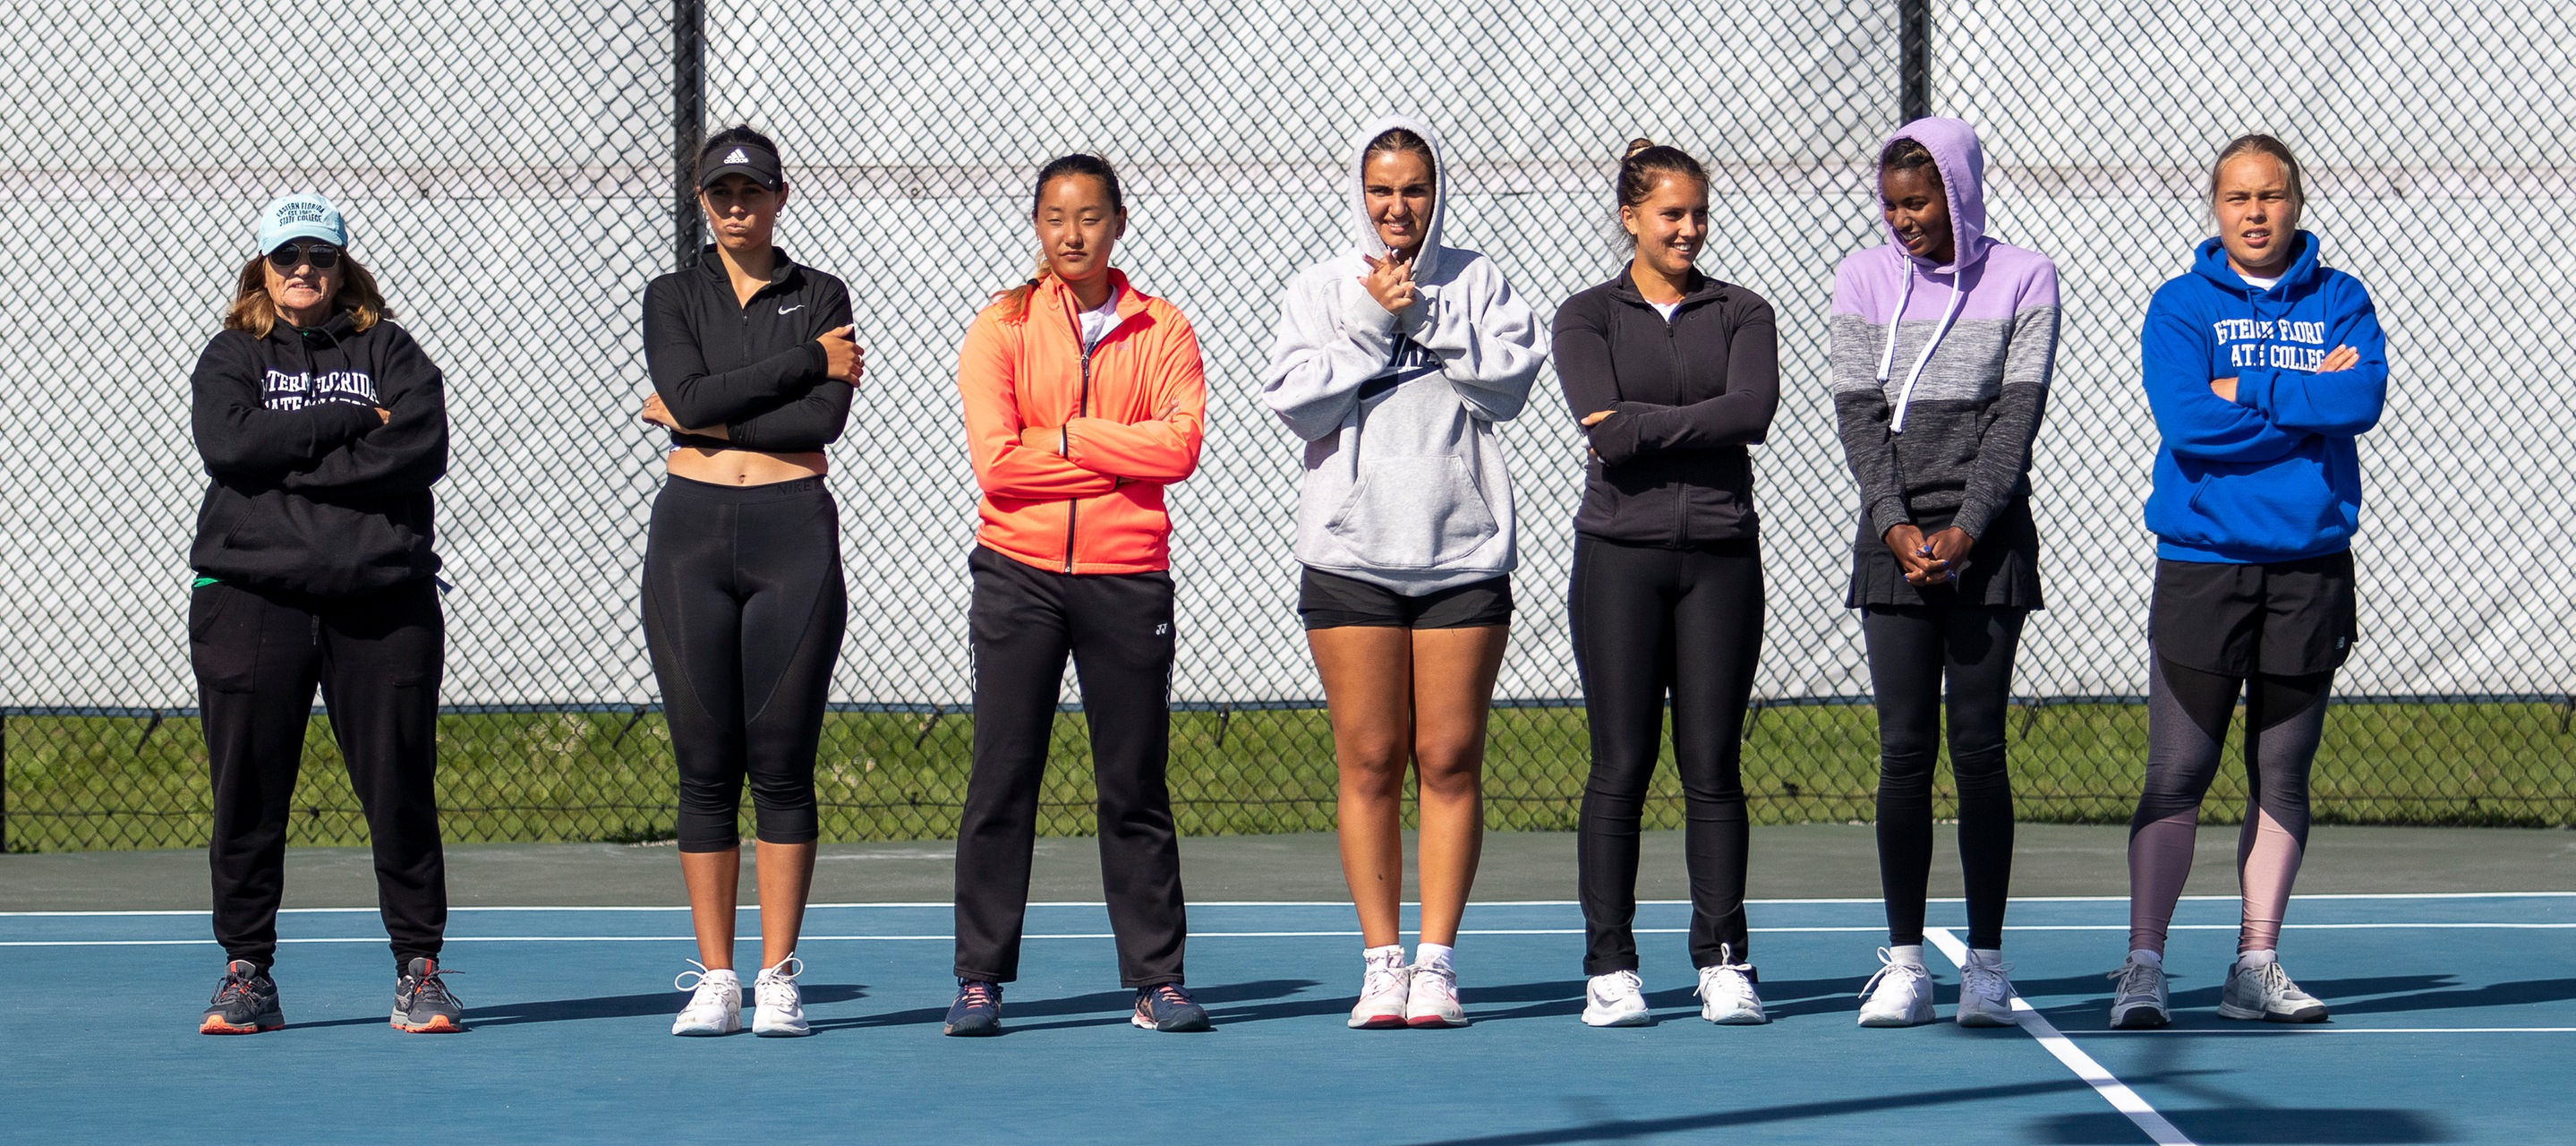 Women's tennis match postponed, back in action Friday